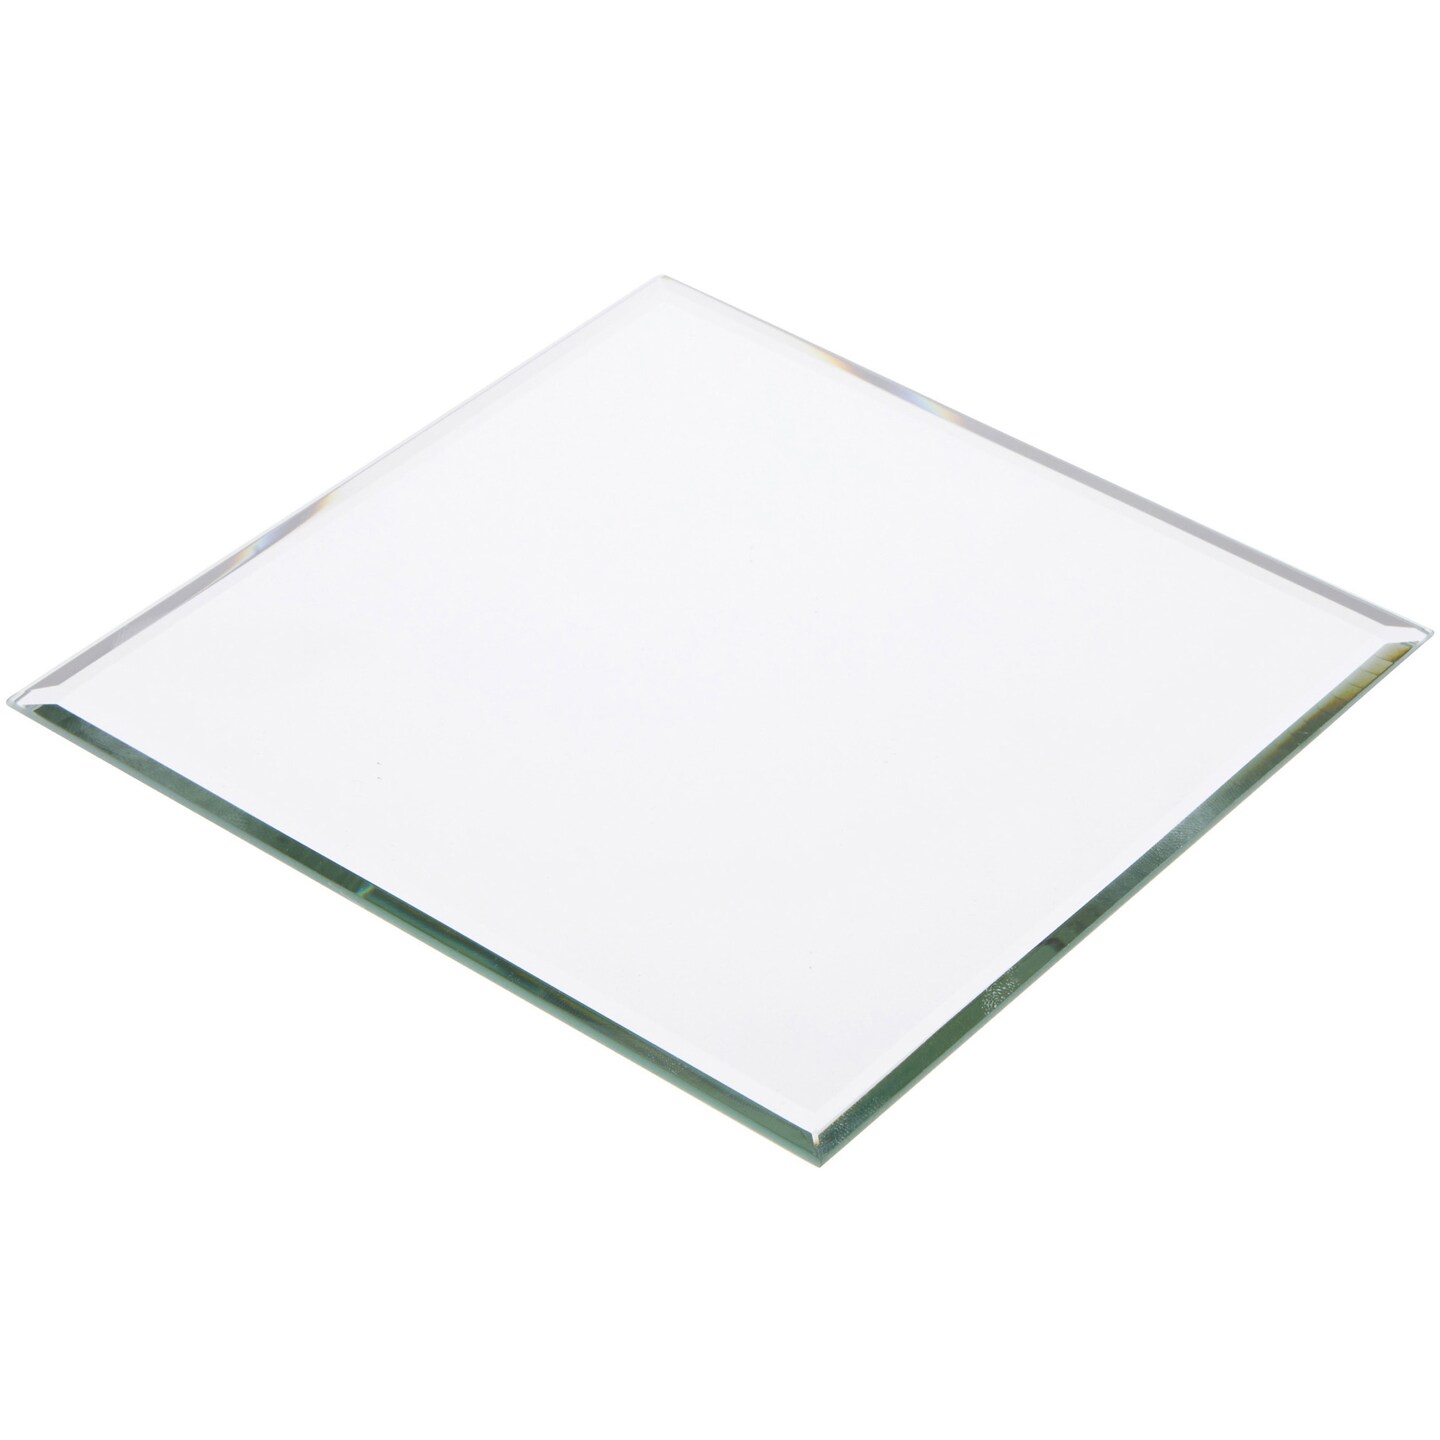 Plymor Square 3mm Beveled Glass Mirror, 6 inch x 6 inch